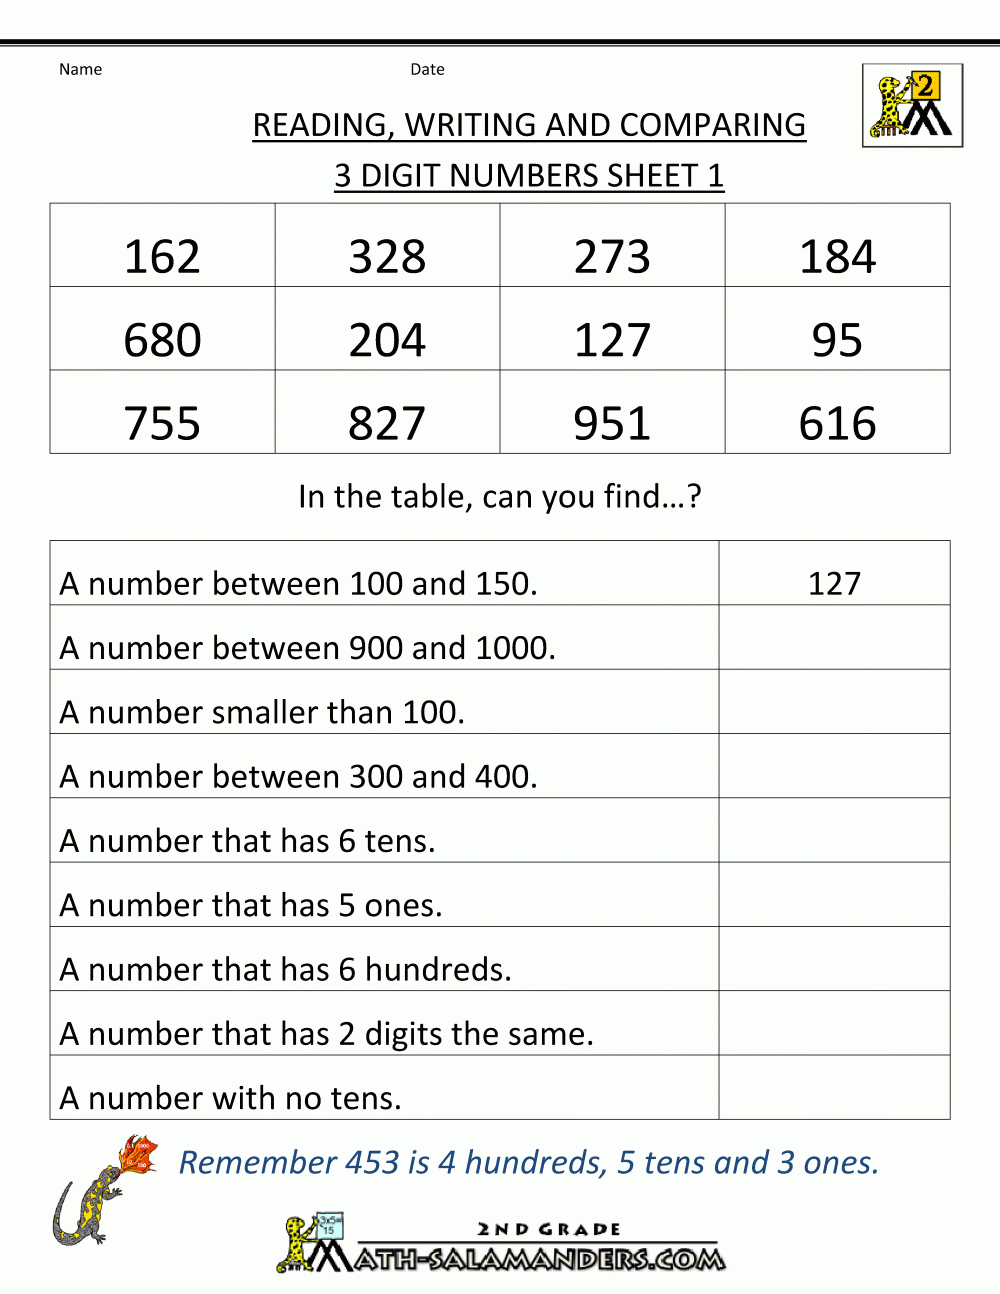 Free Place Value Worksheets  Reading And Writing 3 Digit Numbers For Place Value Worksheets Grade 5